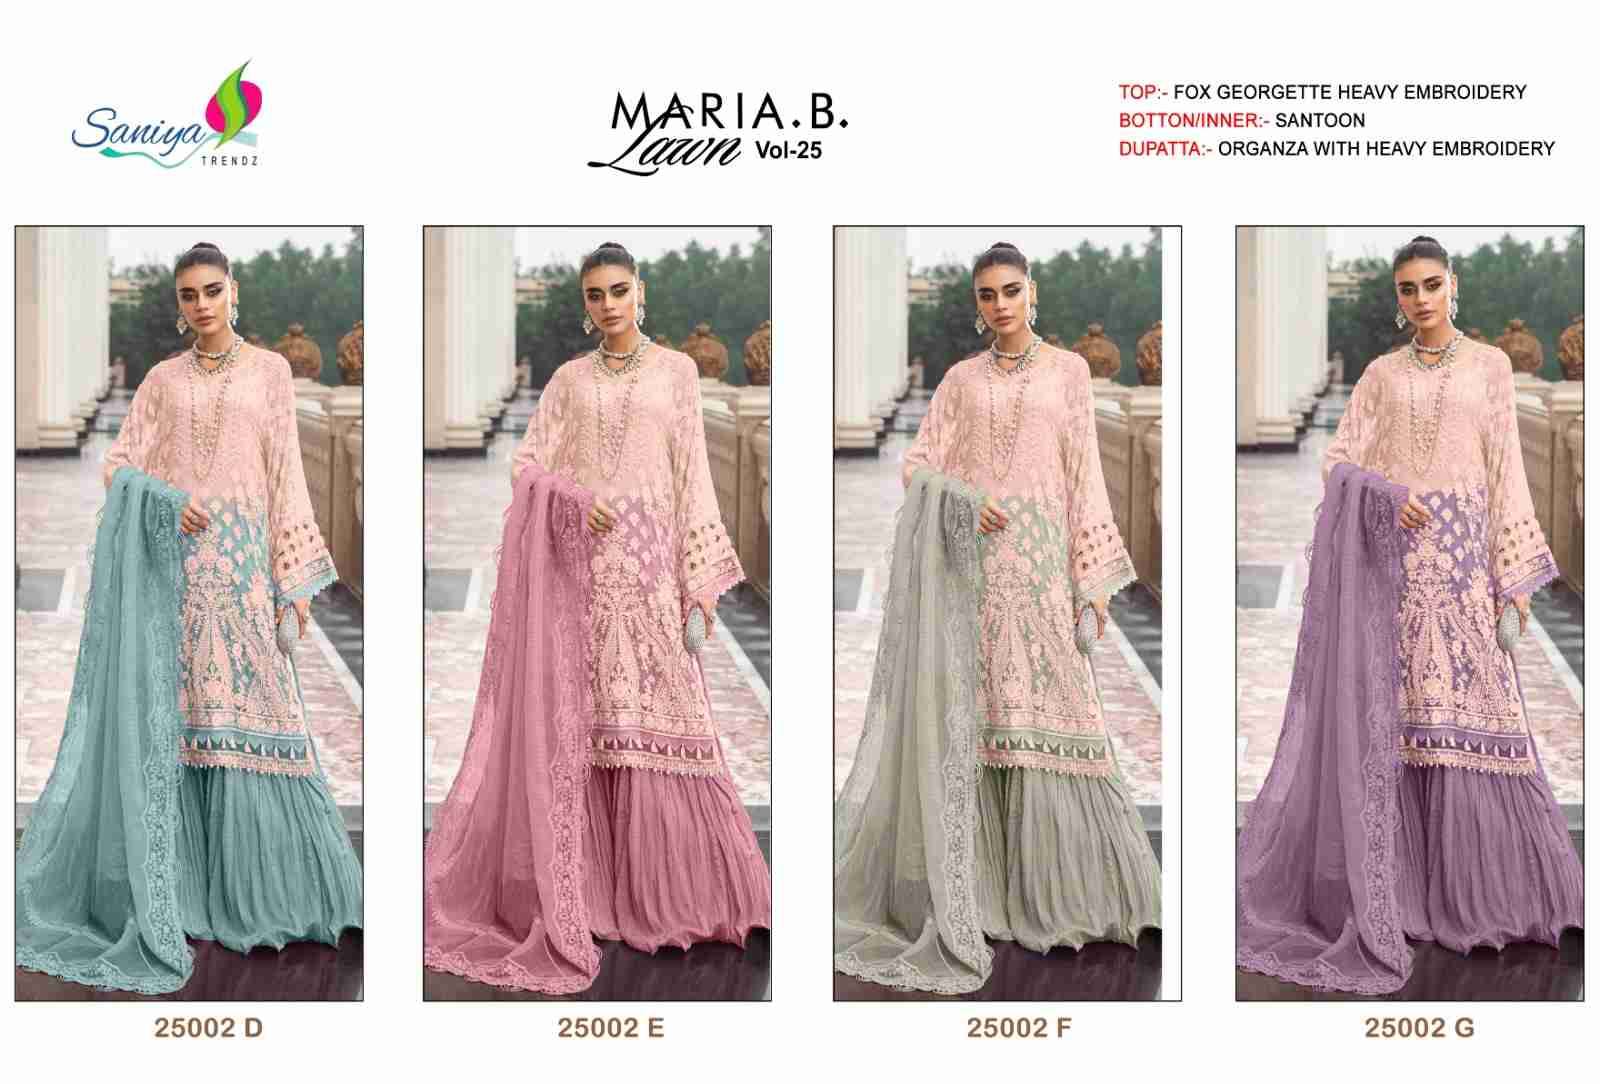 Maria.B. Lawn Vol-25 By Saniya Trendz 25002-D To 25002-G Series Beautiful Pakistani Suits Colorful Stylish Fancy Casual Wear & Ethnic Wear Faux Georgette Embroidered Dresses At Wholesale Price